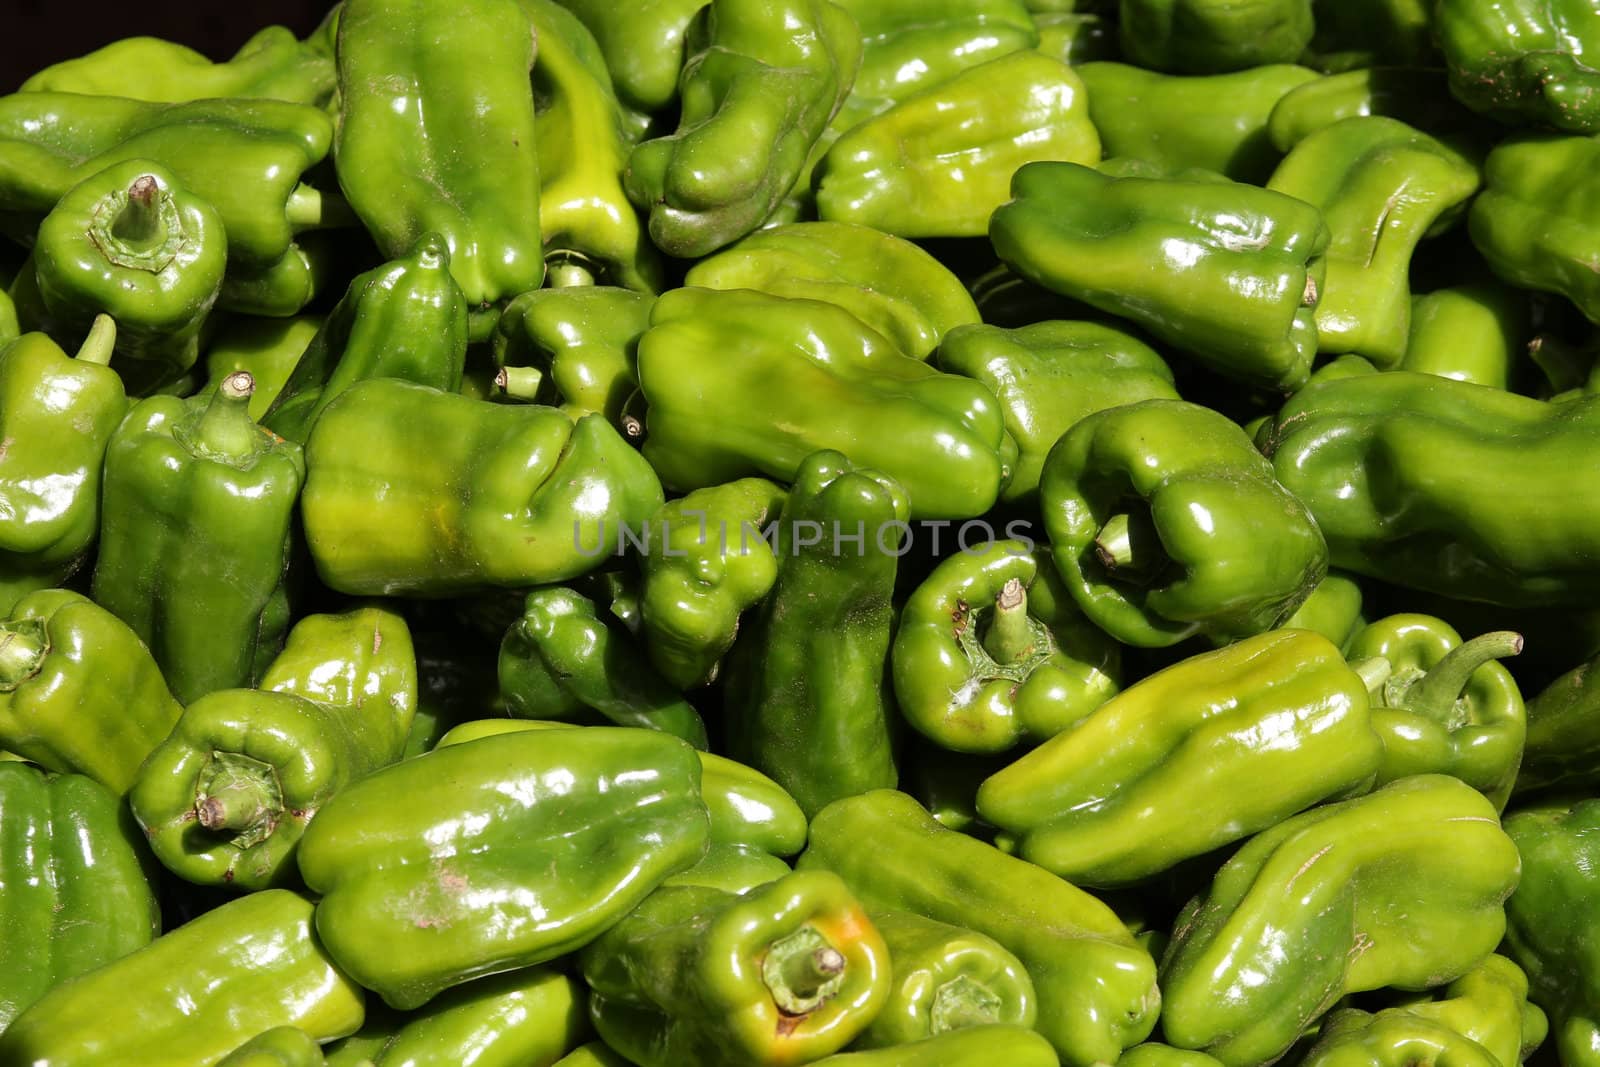 Green peppers stacked at a market place. Green grocer's store. Cuba organic produce.